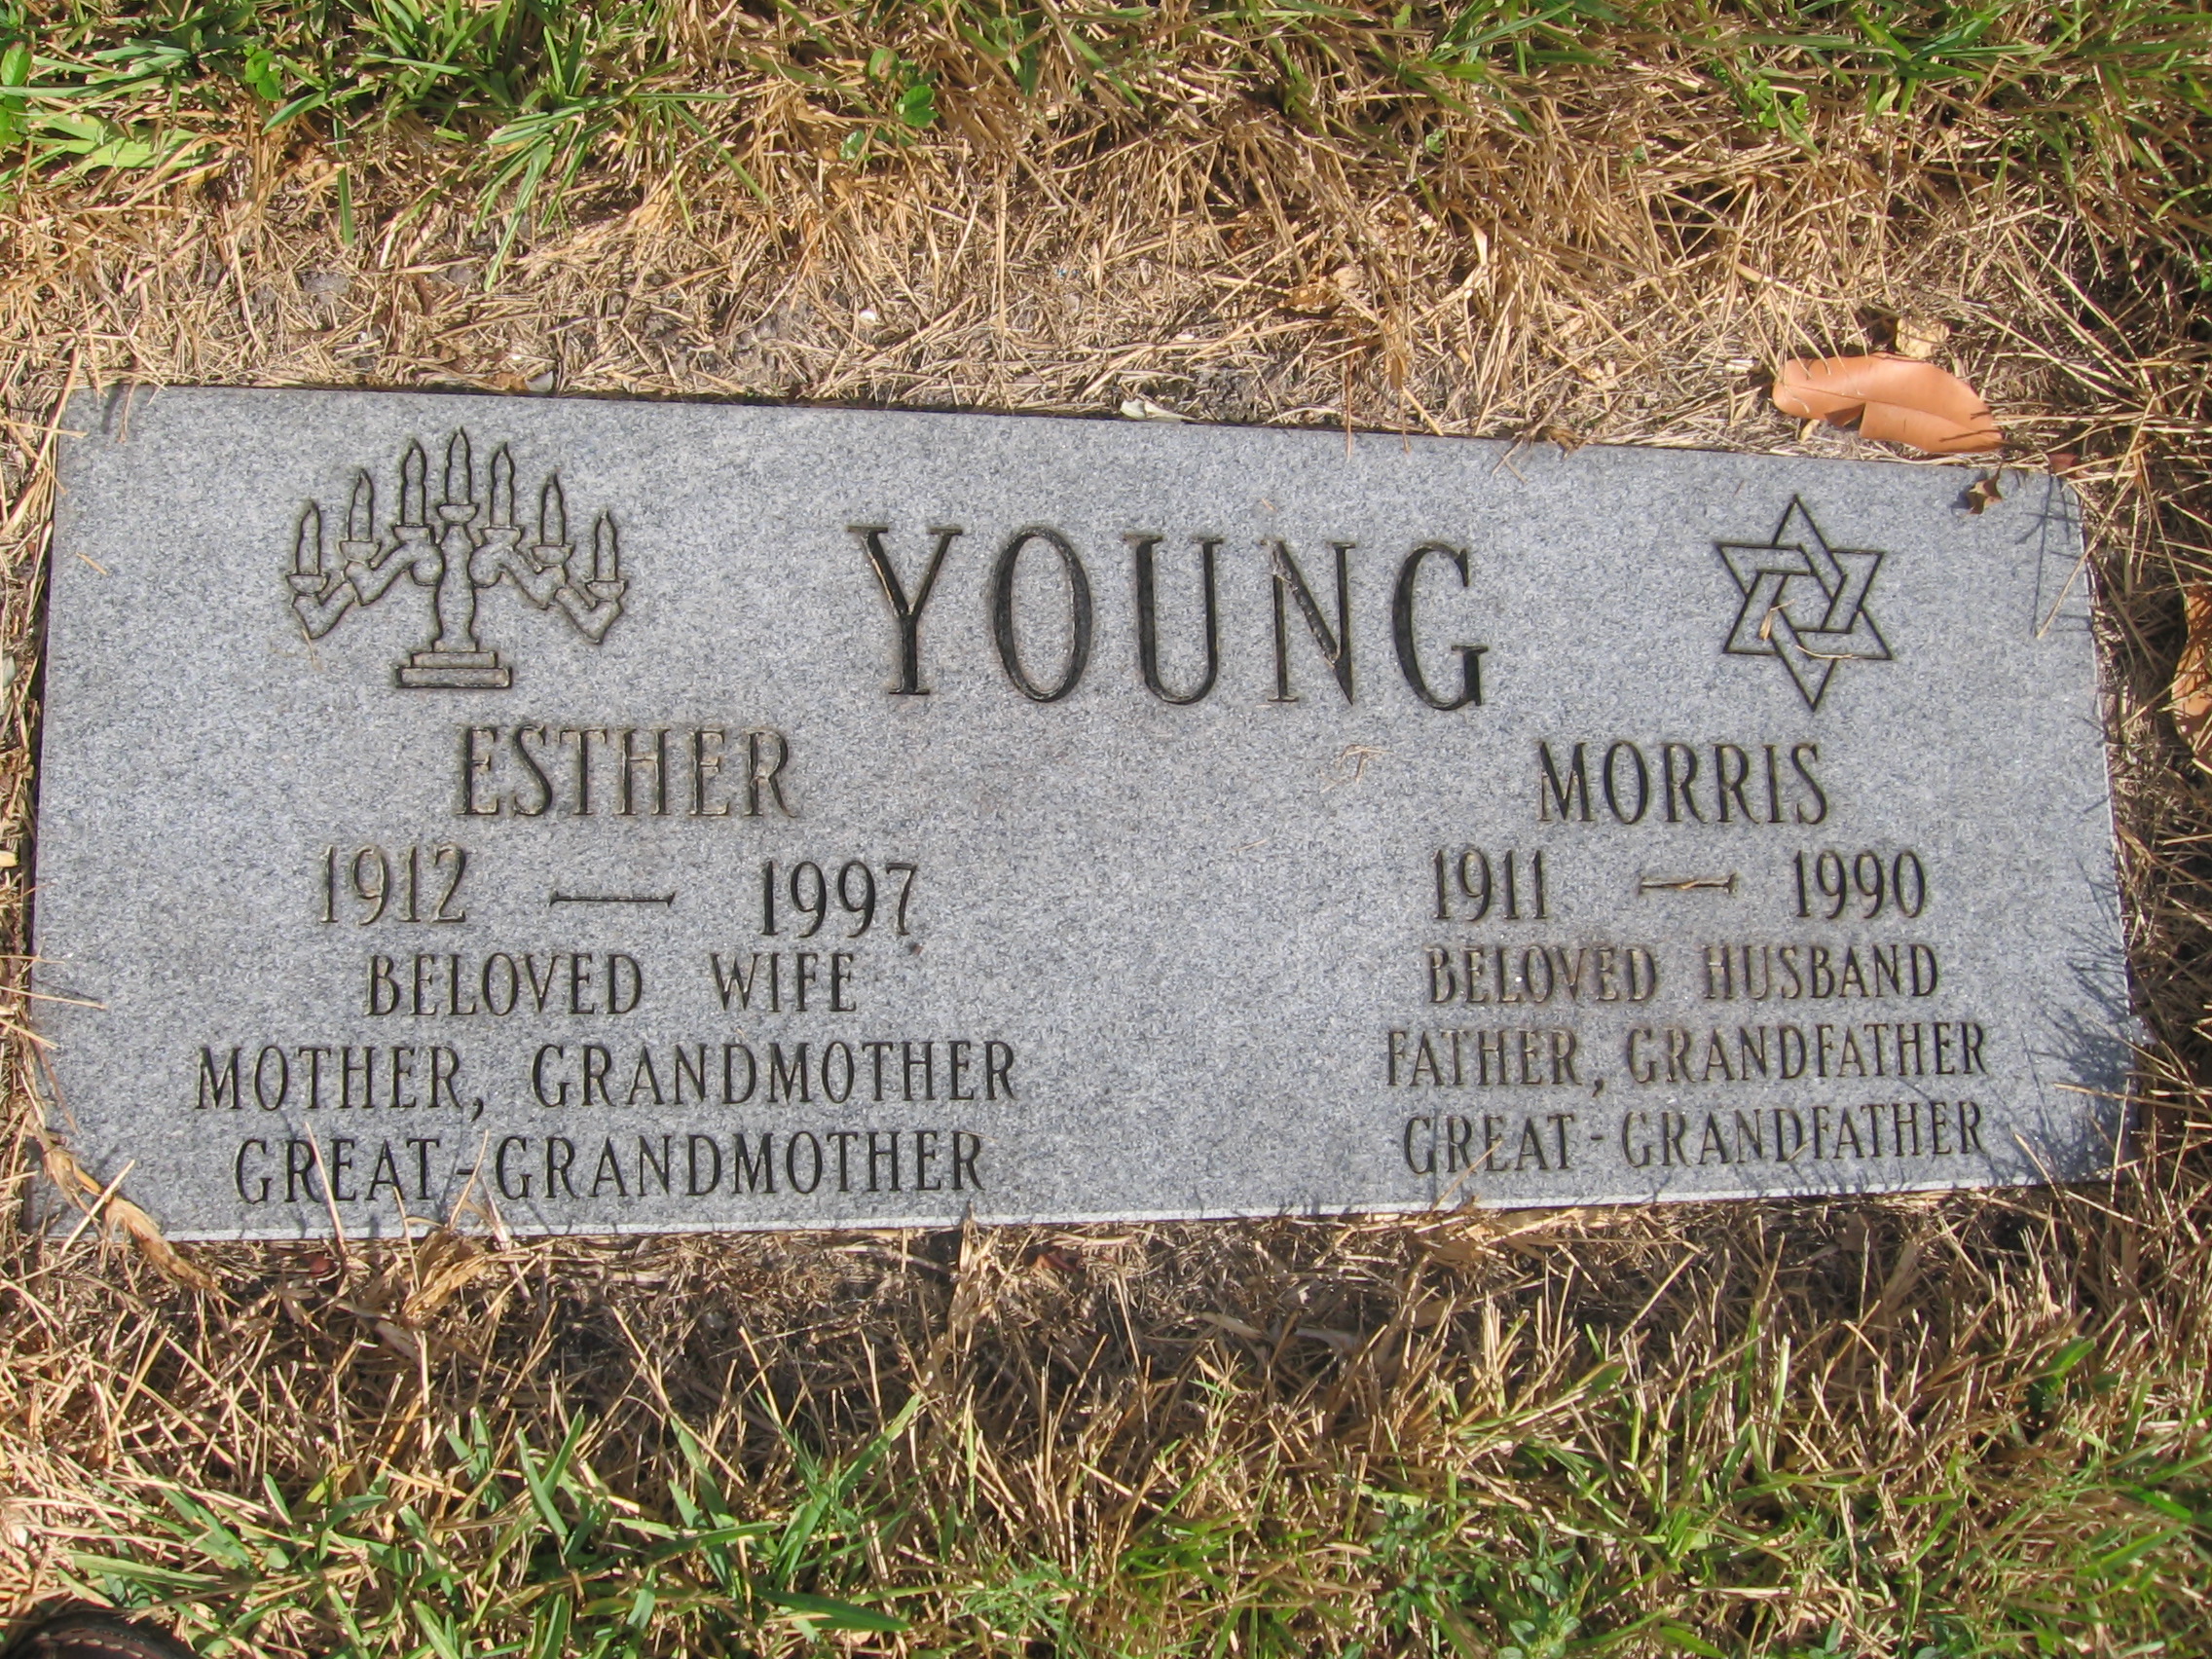 Esther Young